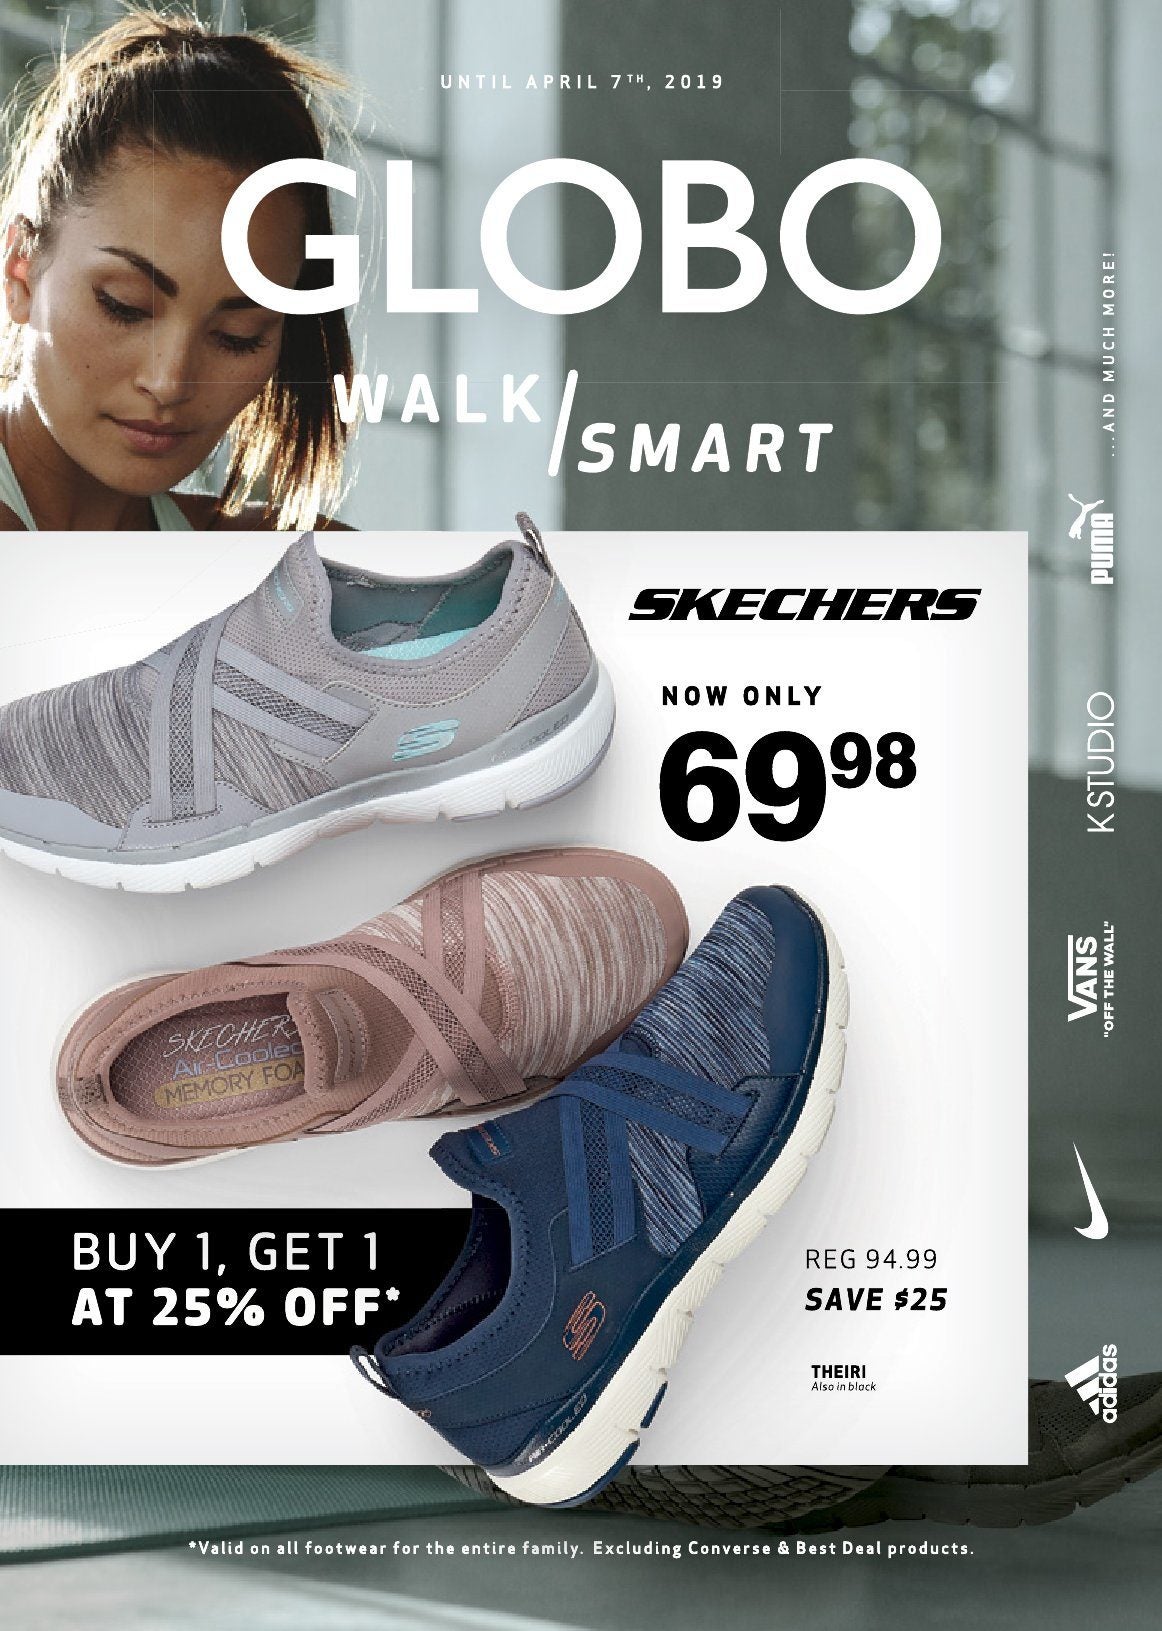 Globo Shoes March 27 2019 | YP Shopwise